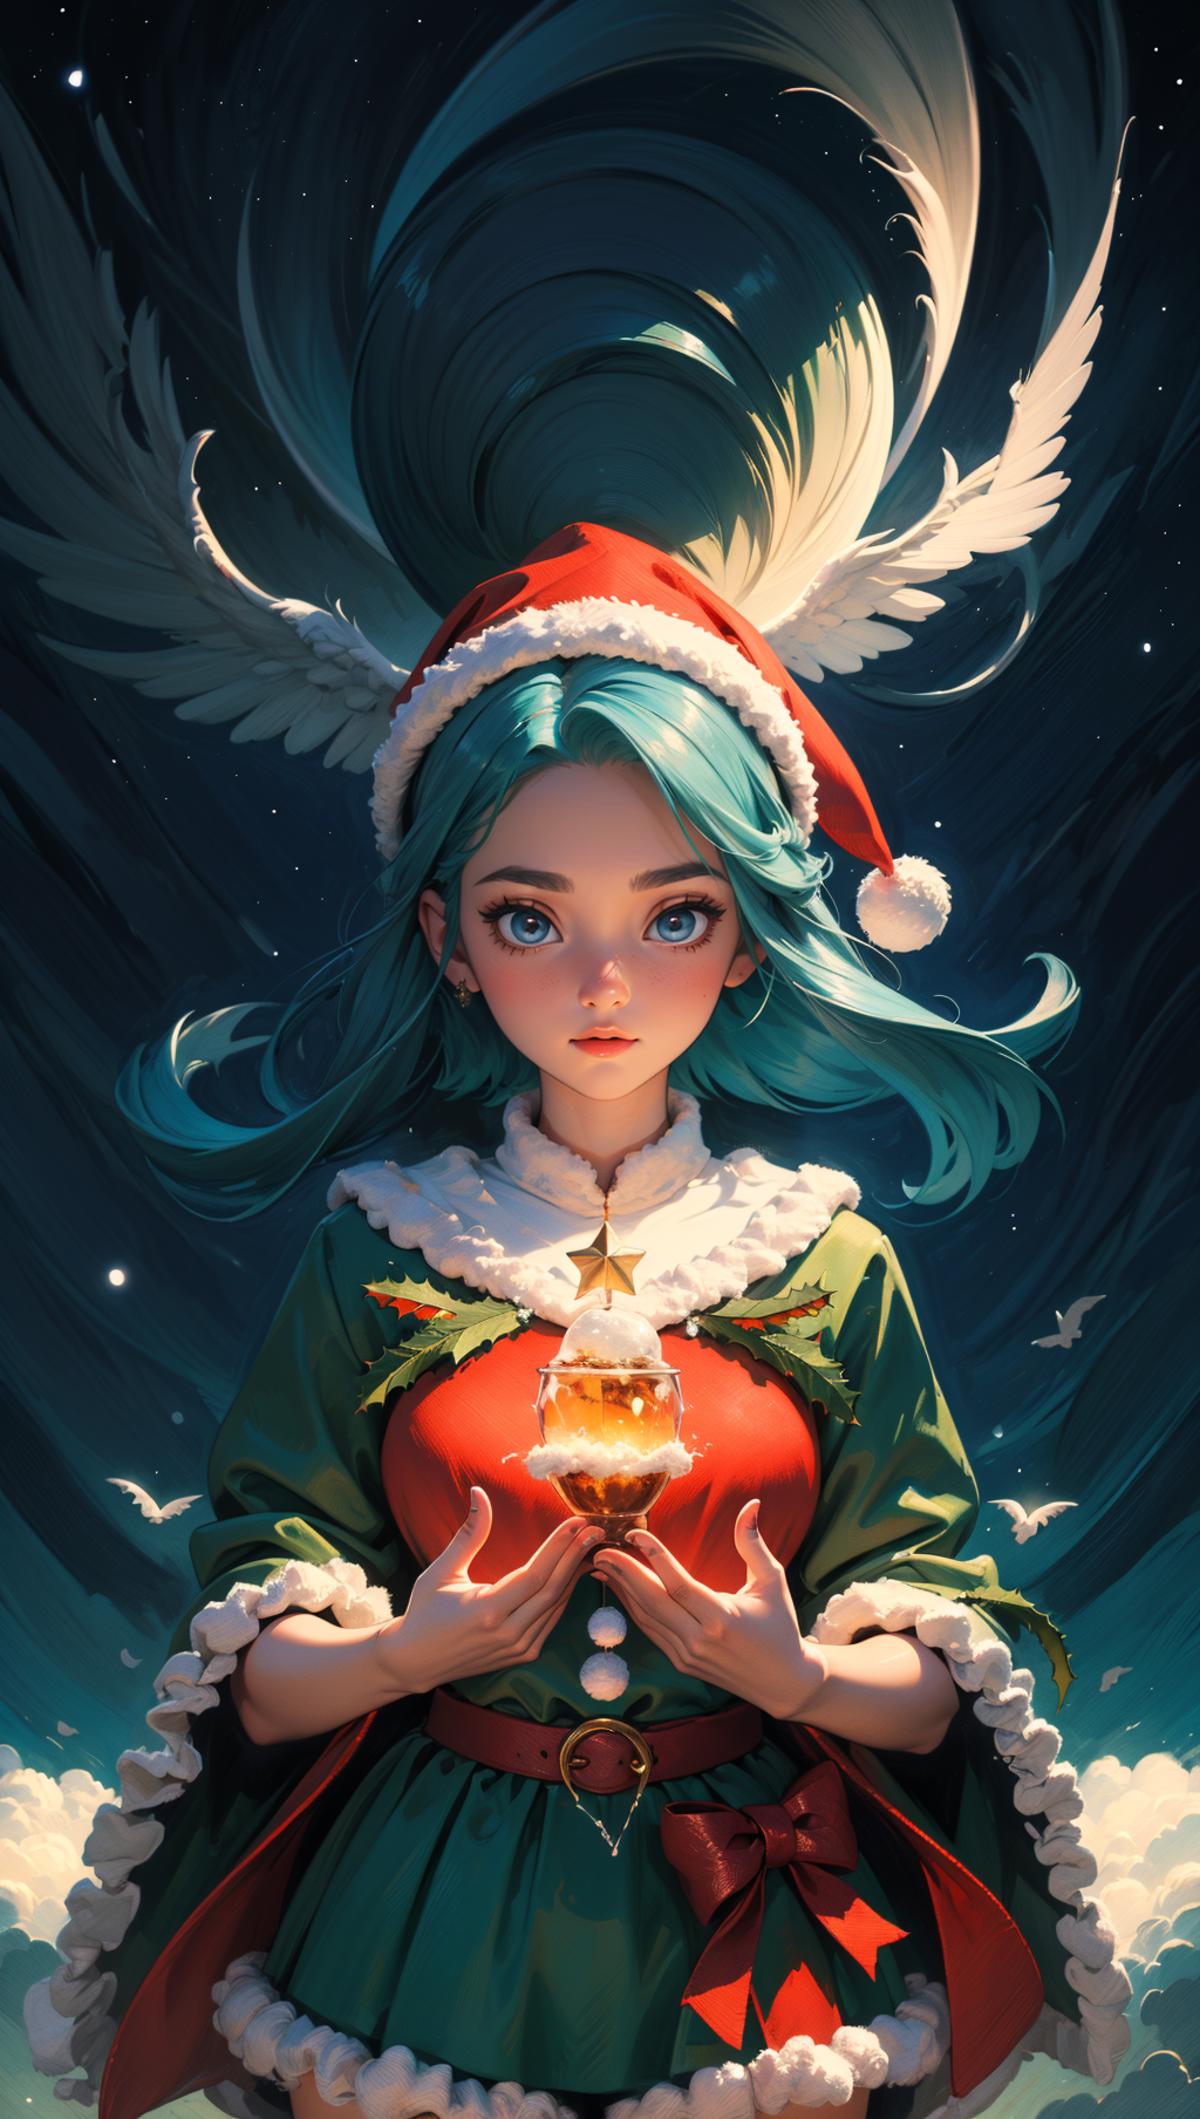 Anime-style art of a girl wearing a Santa hat and holding a star ornament.